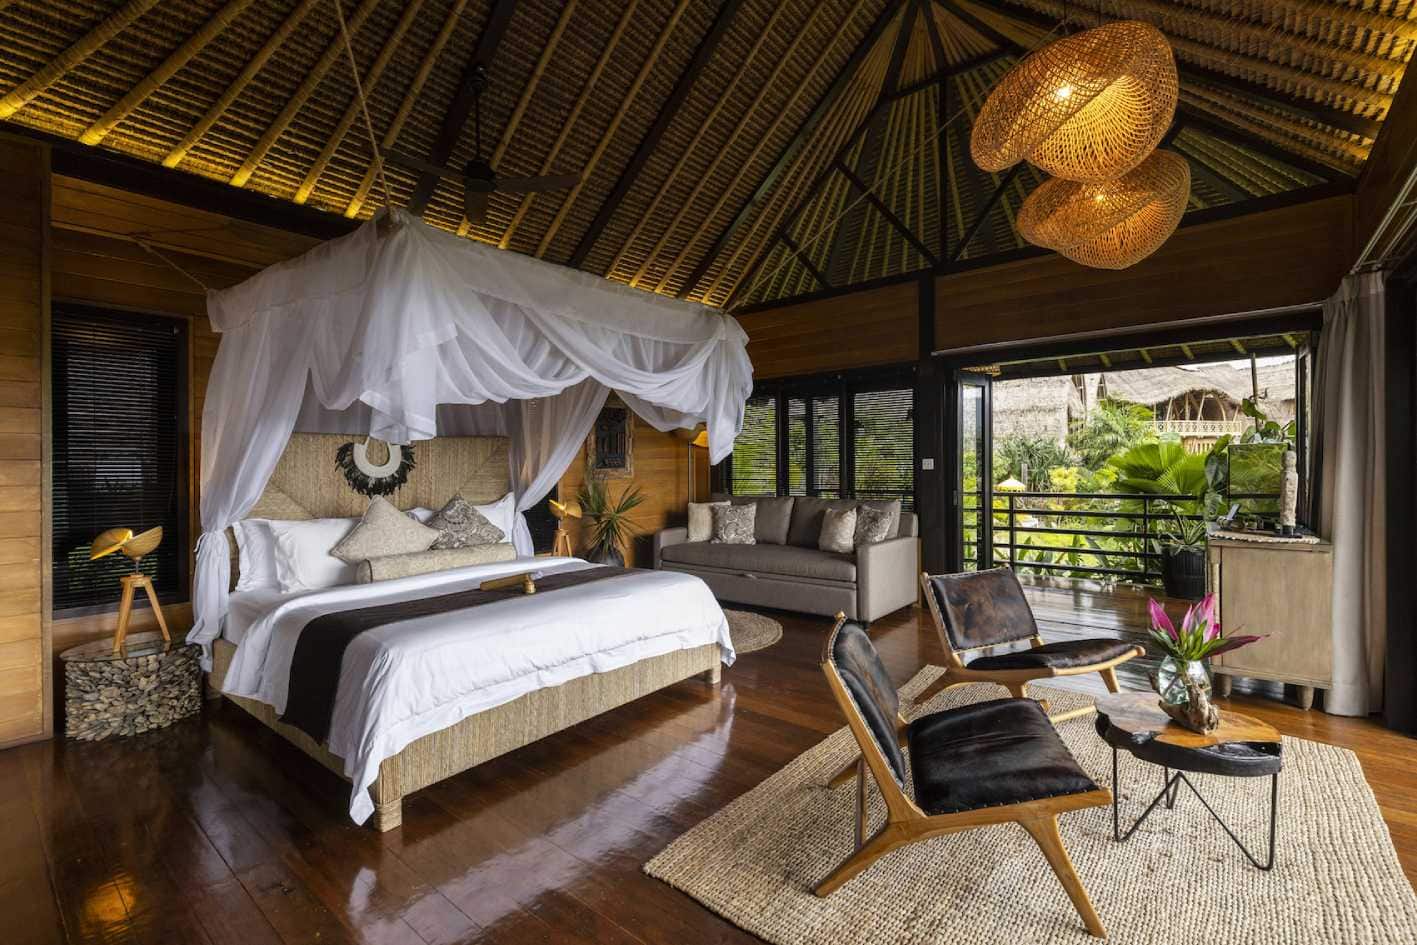 A bedroom at Samanvaya Luxury Resort with a white bed and two brown chairs.